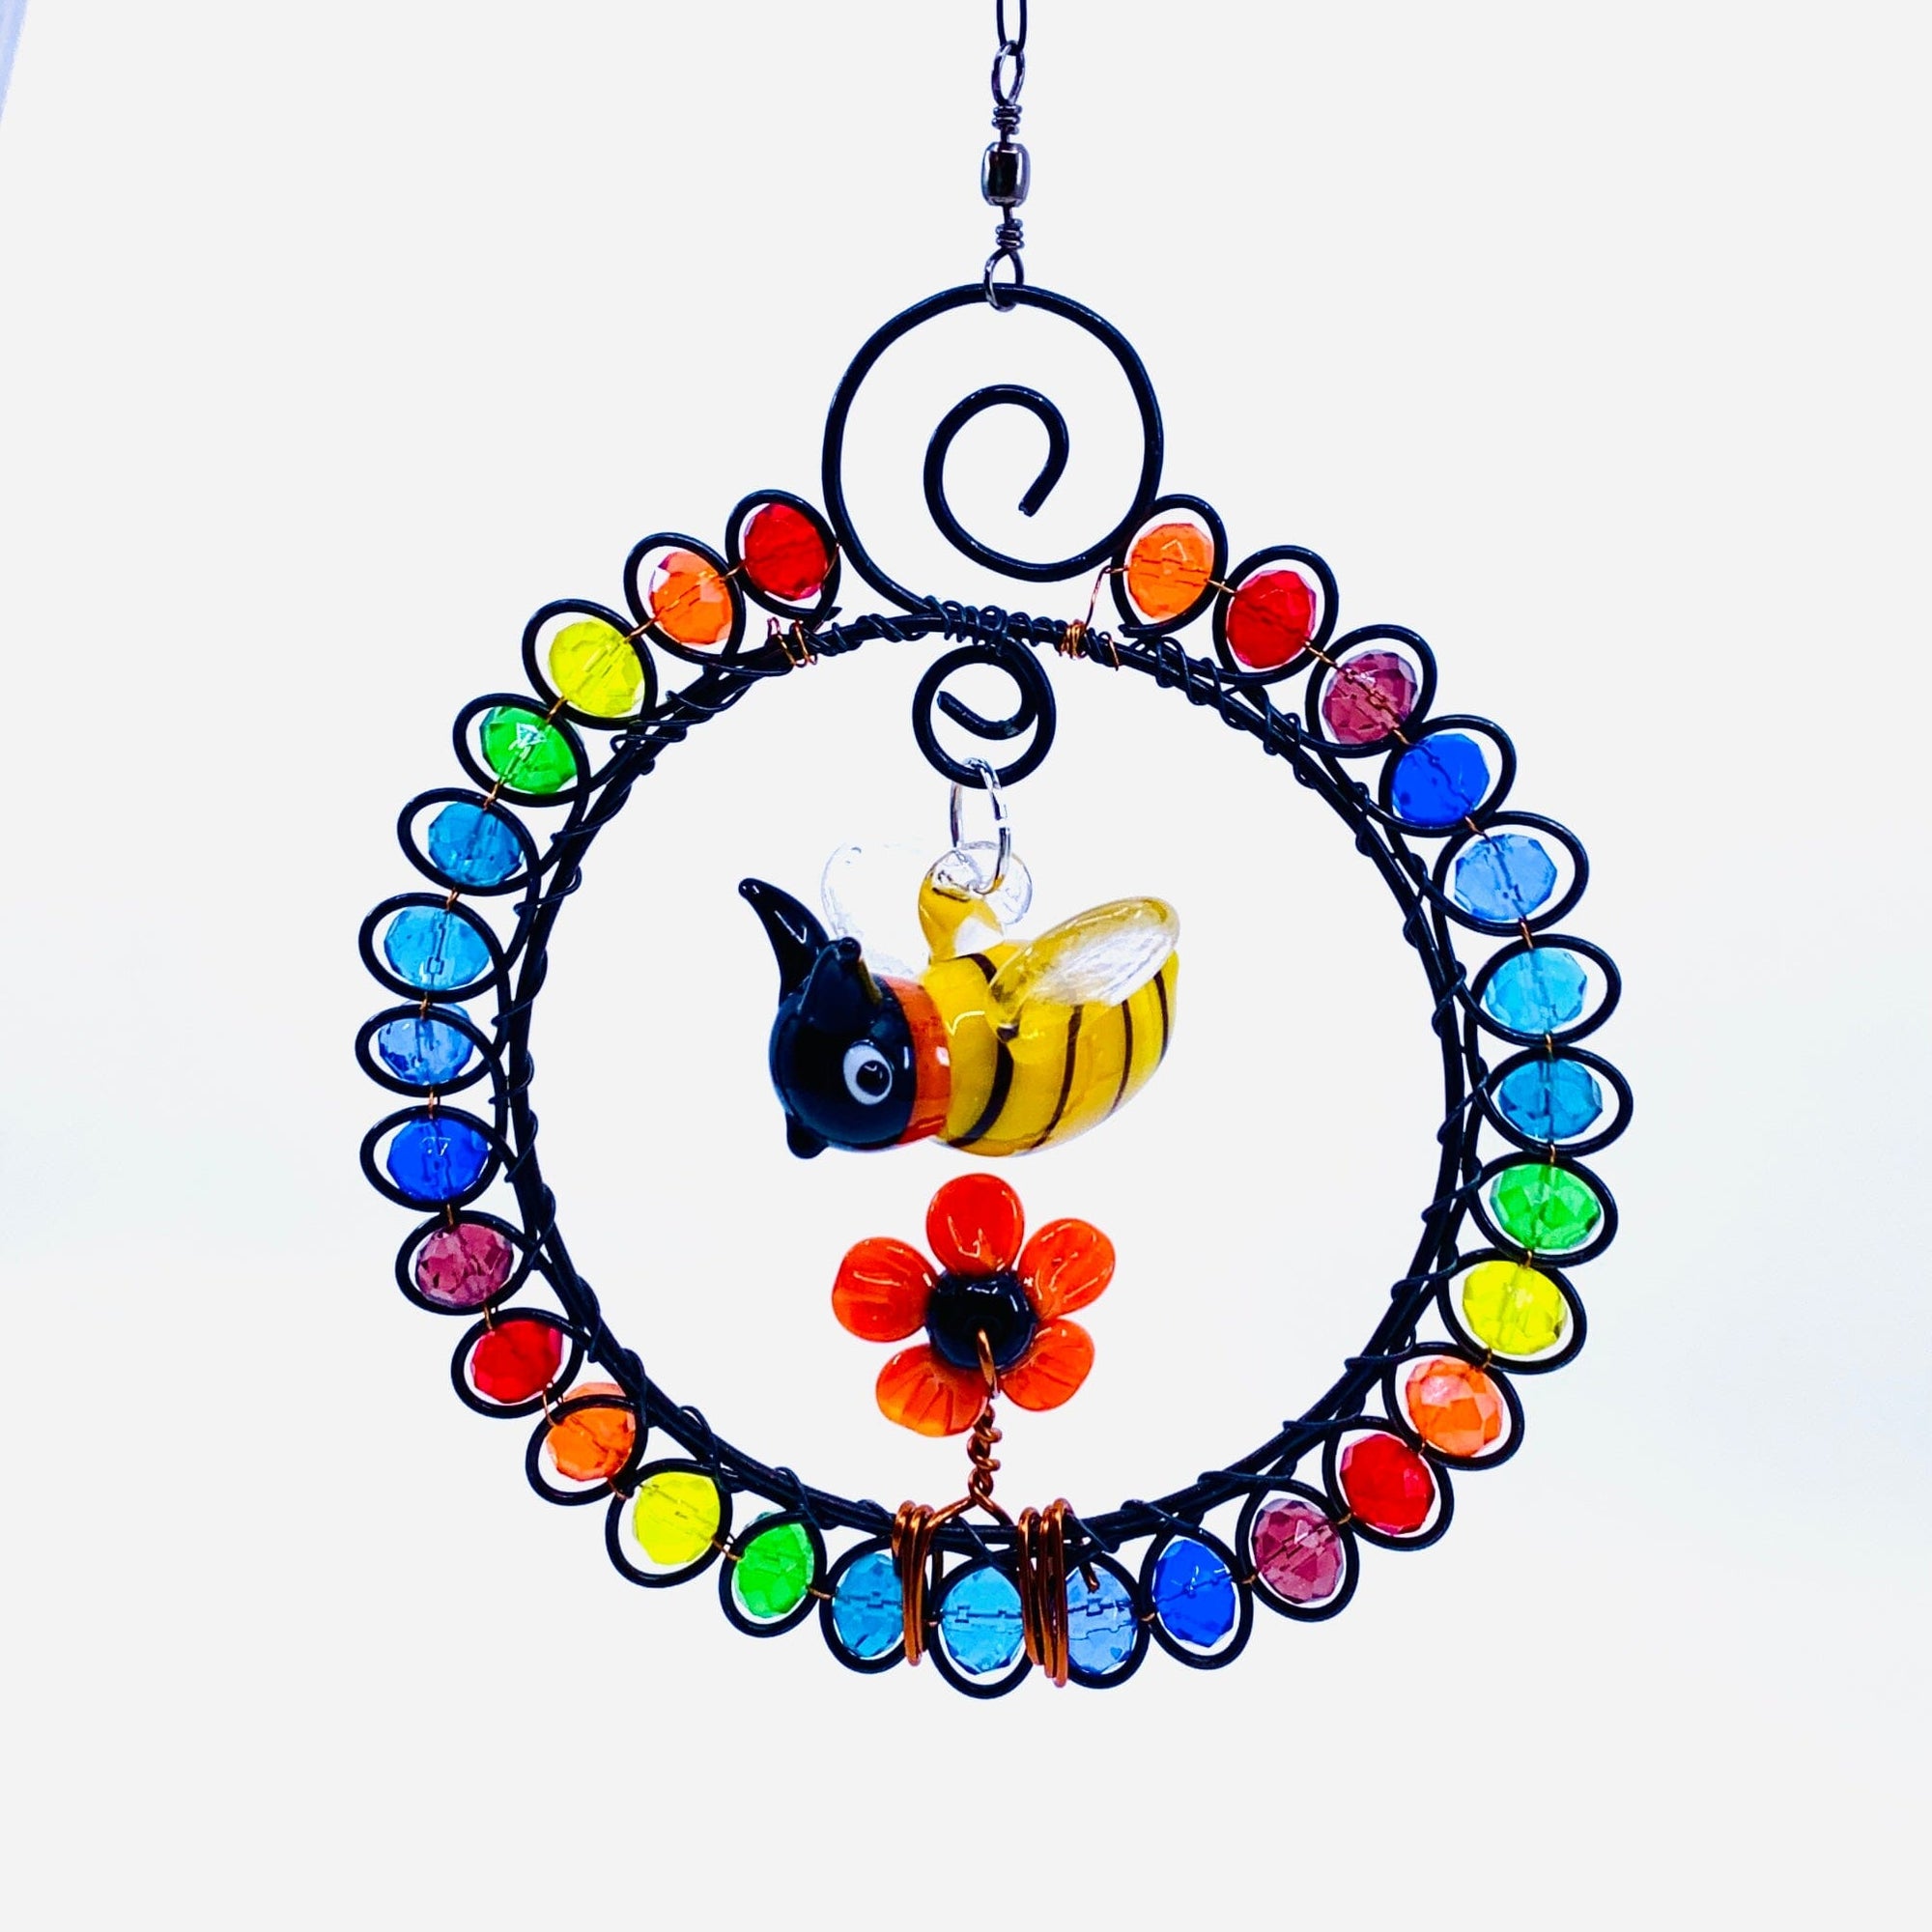 Glass Beaded Sun catcher with Bumble Bee and Flower, 6 Decor Whimsical Wire and Glass 